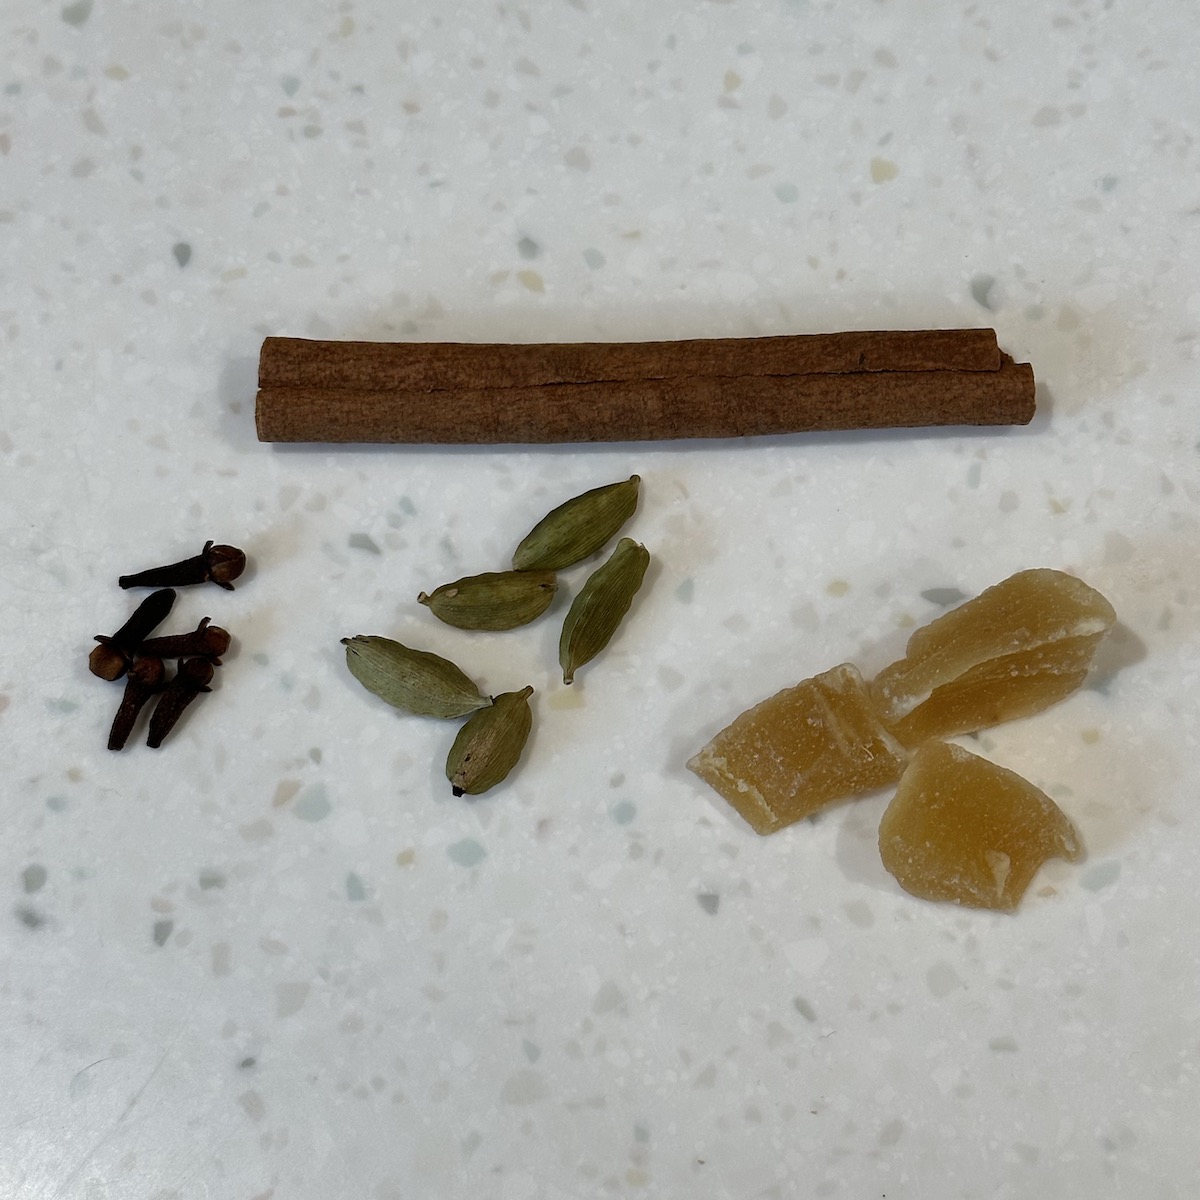 cinnamon stick with cloves, cardamom pods, and ginger below it.